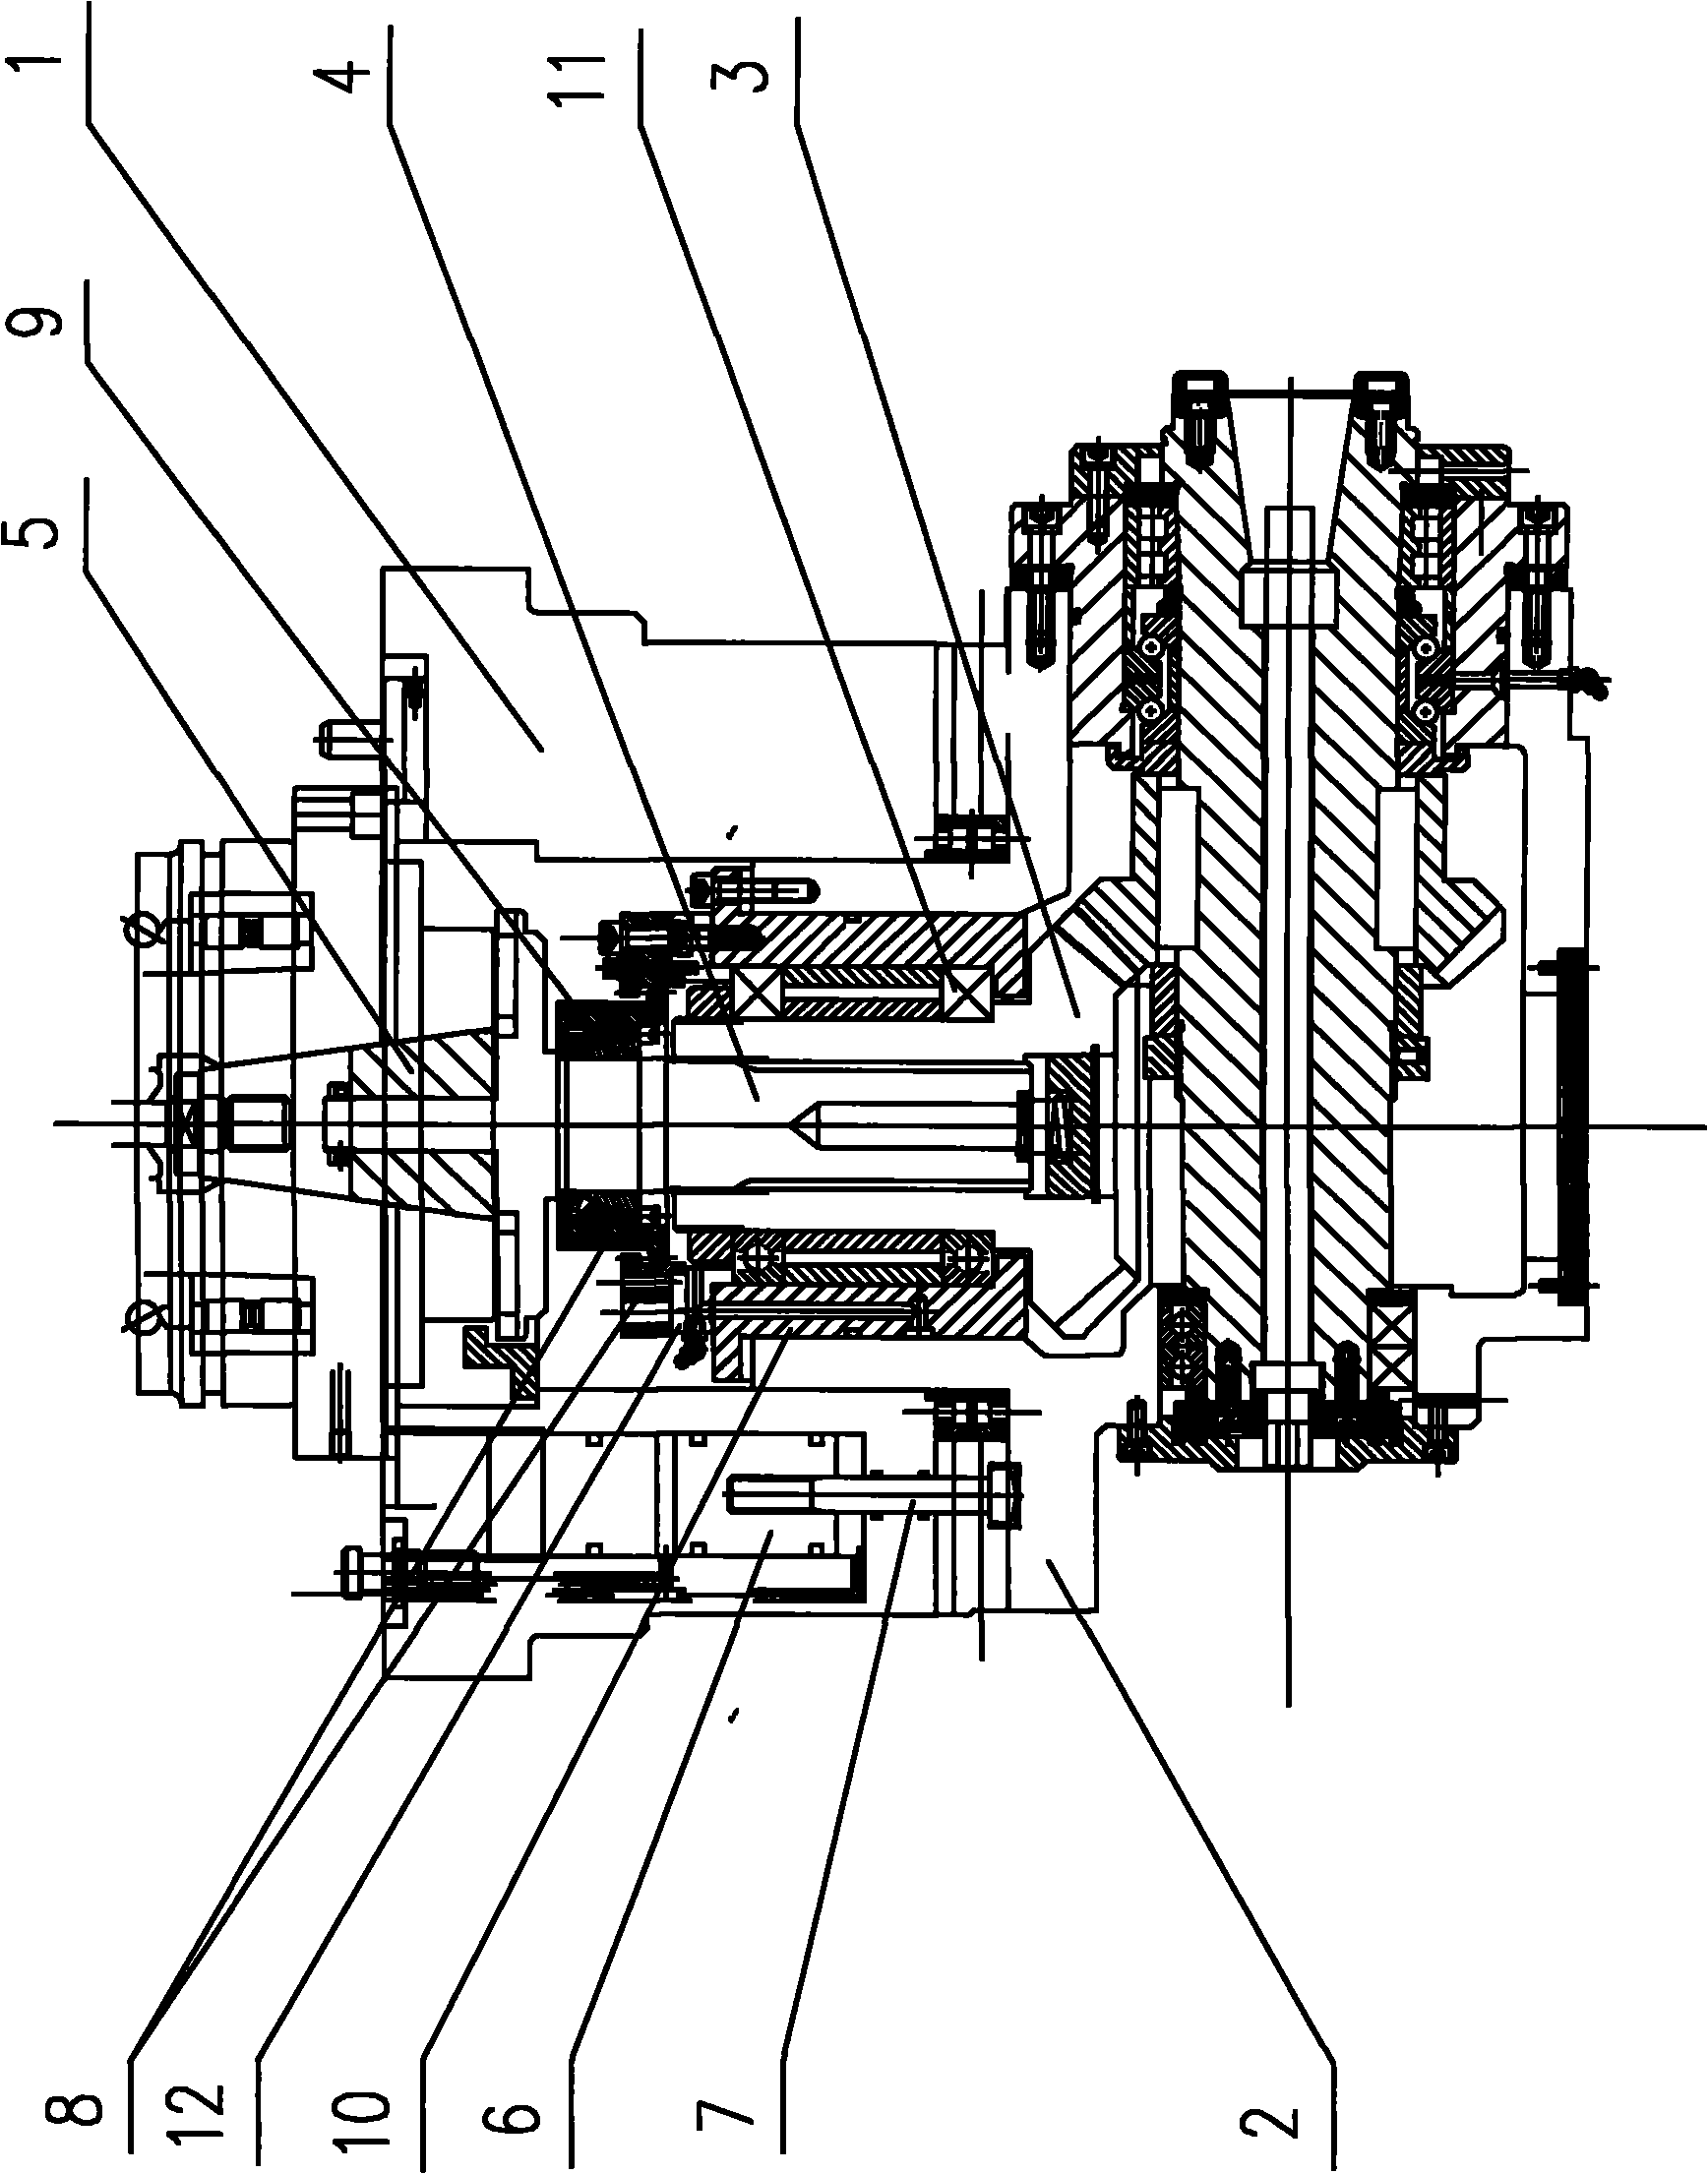 Automatic indexing right-angle milling head driven by main motor